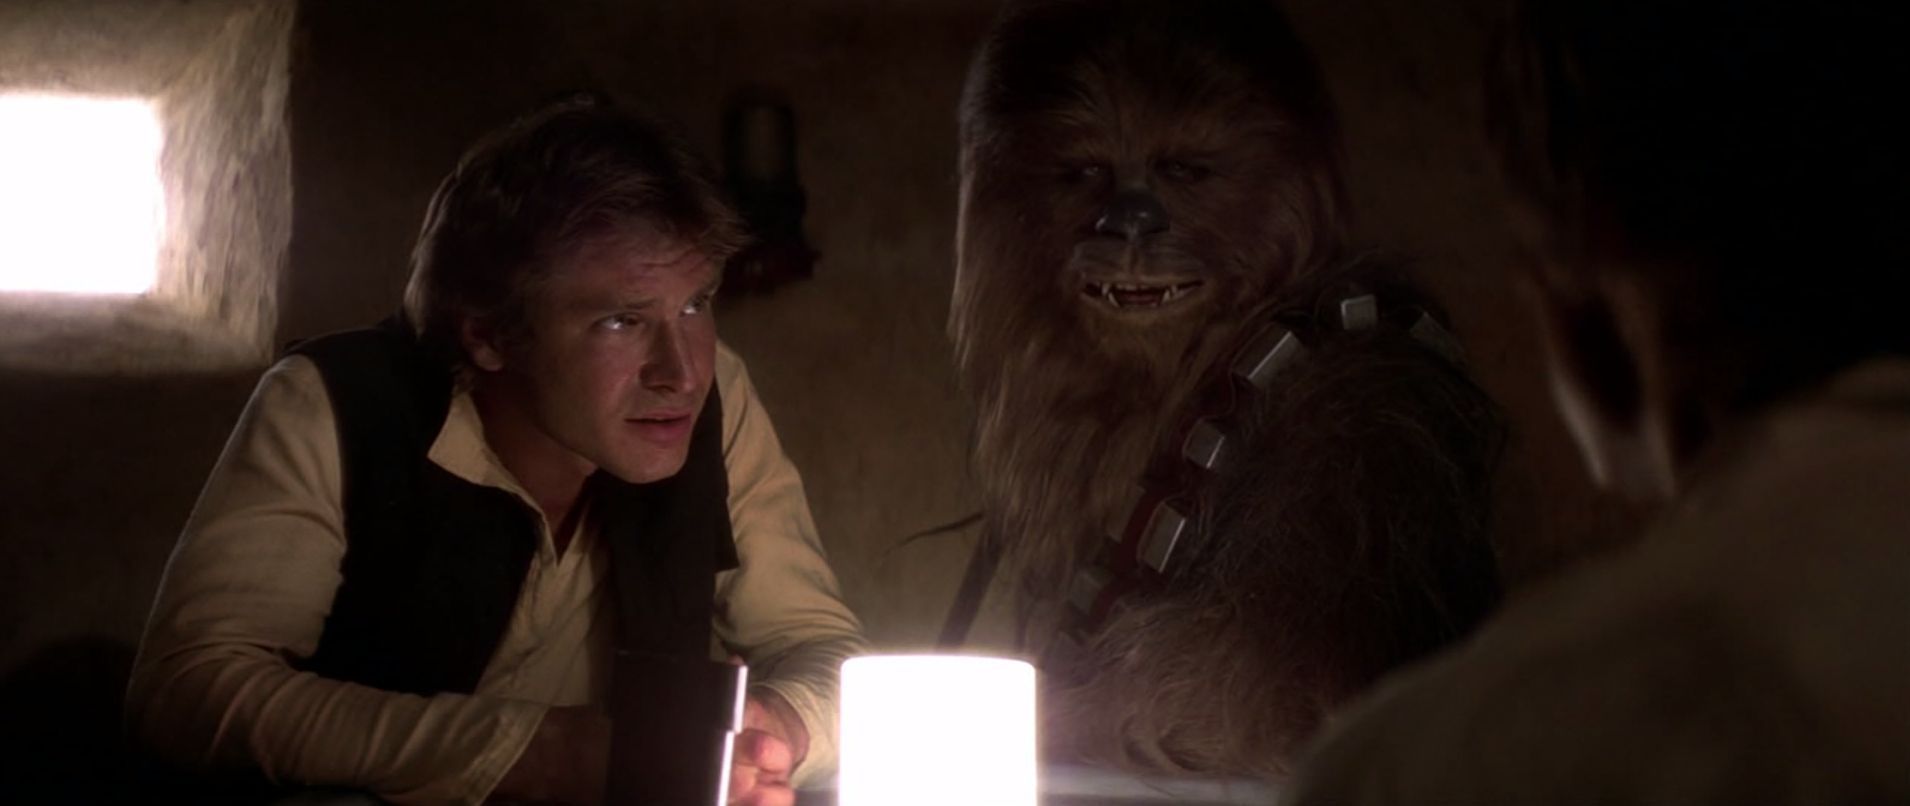 An easy one to start... How many Parsecs did Han Solo complete the Kessel Run in?